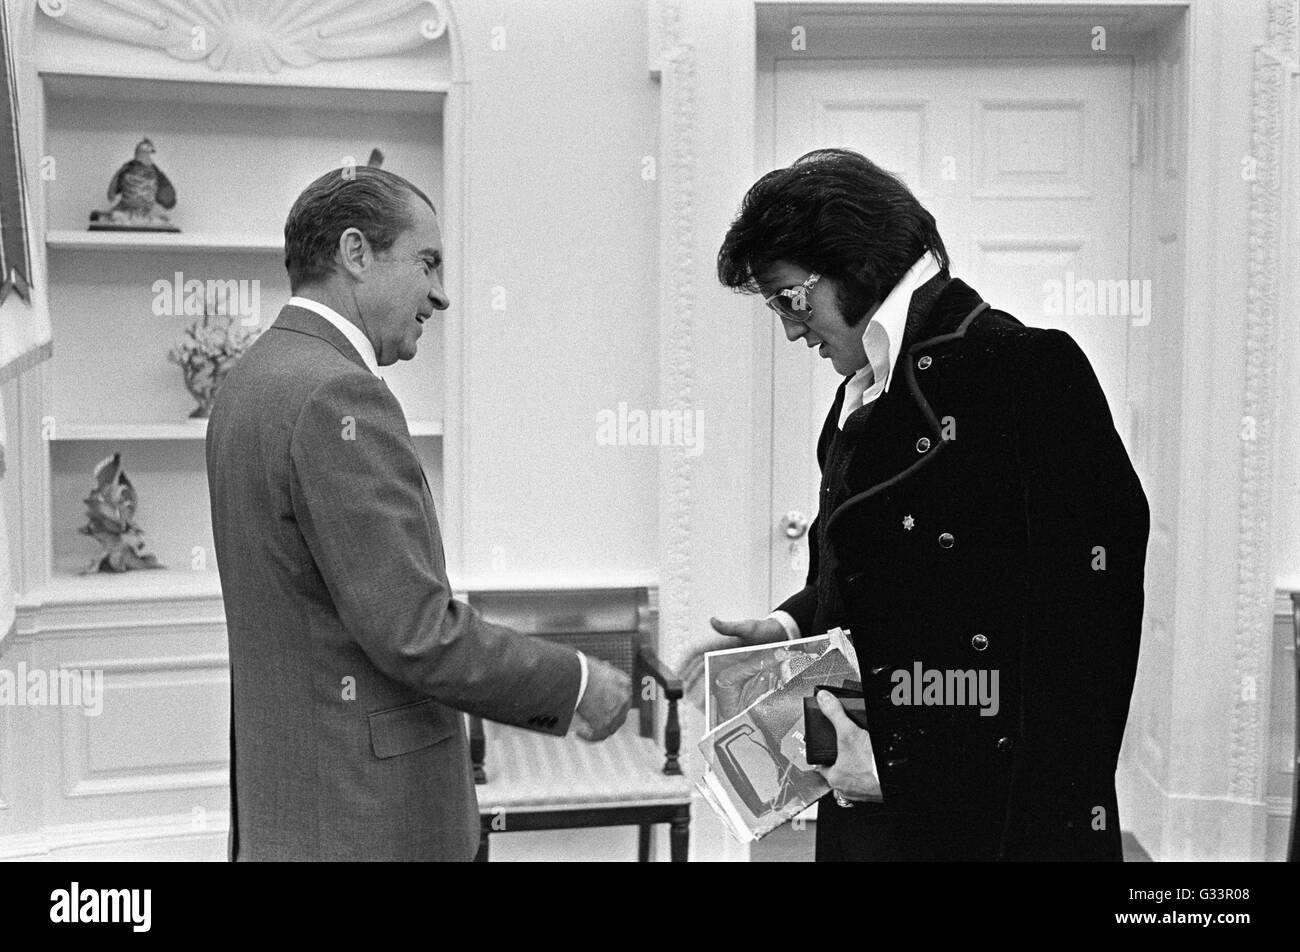 Elvis Presley greets U.S President Richard M. Nixon in the Oval Office at the White House December 21, 1970 in Washington, DC. The meeting was initiated by Presley, who wrote Nixon a six-page letter requesting a visit with the President and suggesting that he be made a 'Federal Agent-at-Large' in the Bureau of Narcotics and Dangerous Drugs. Stock Photo